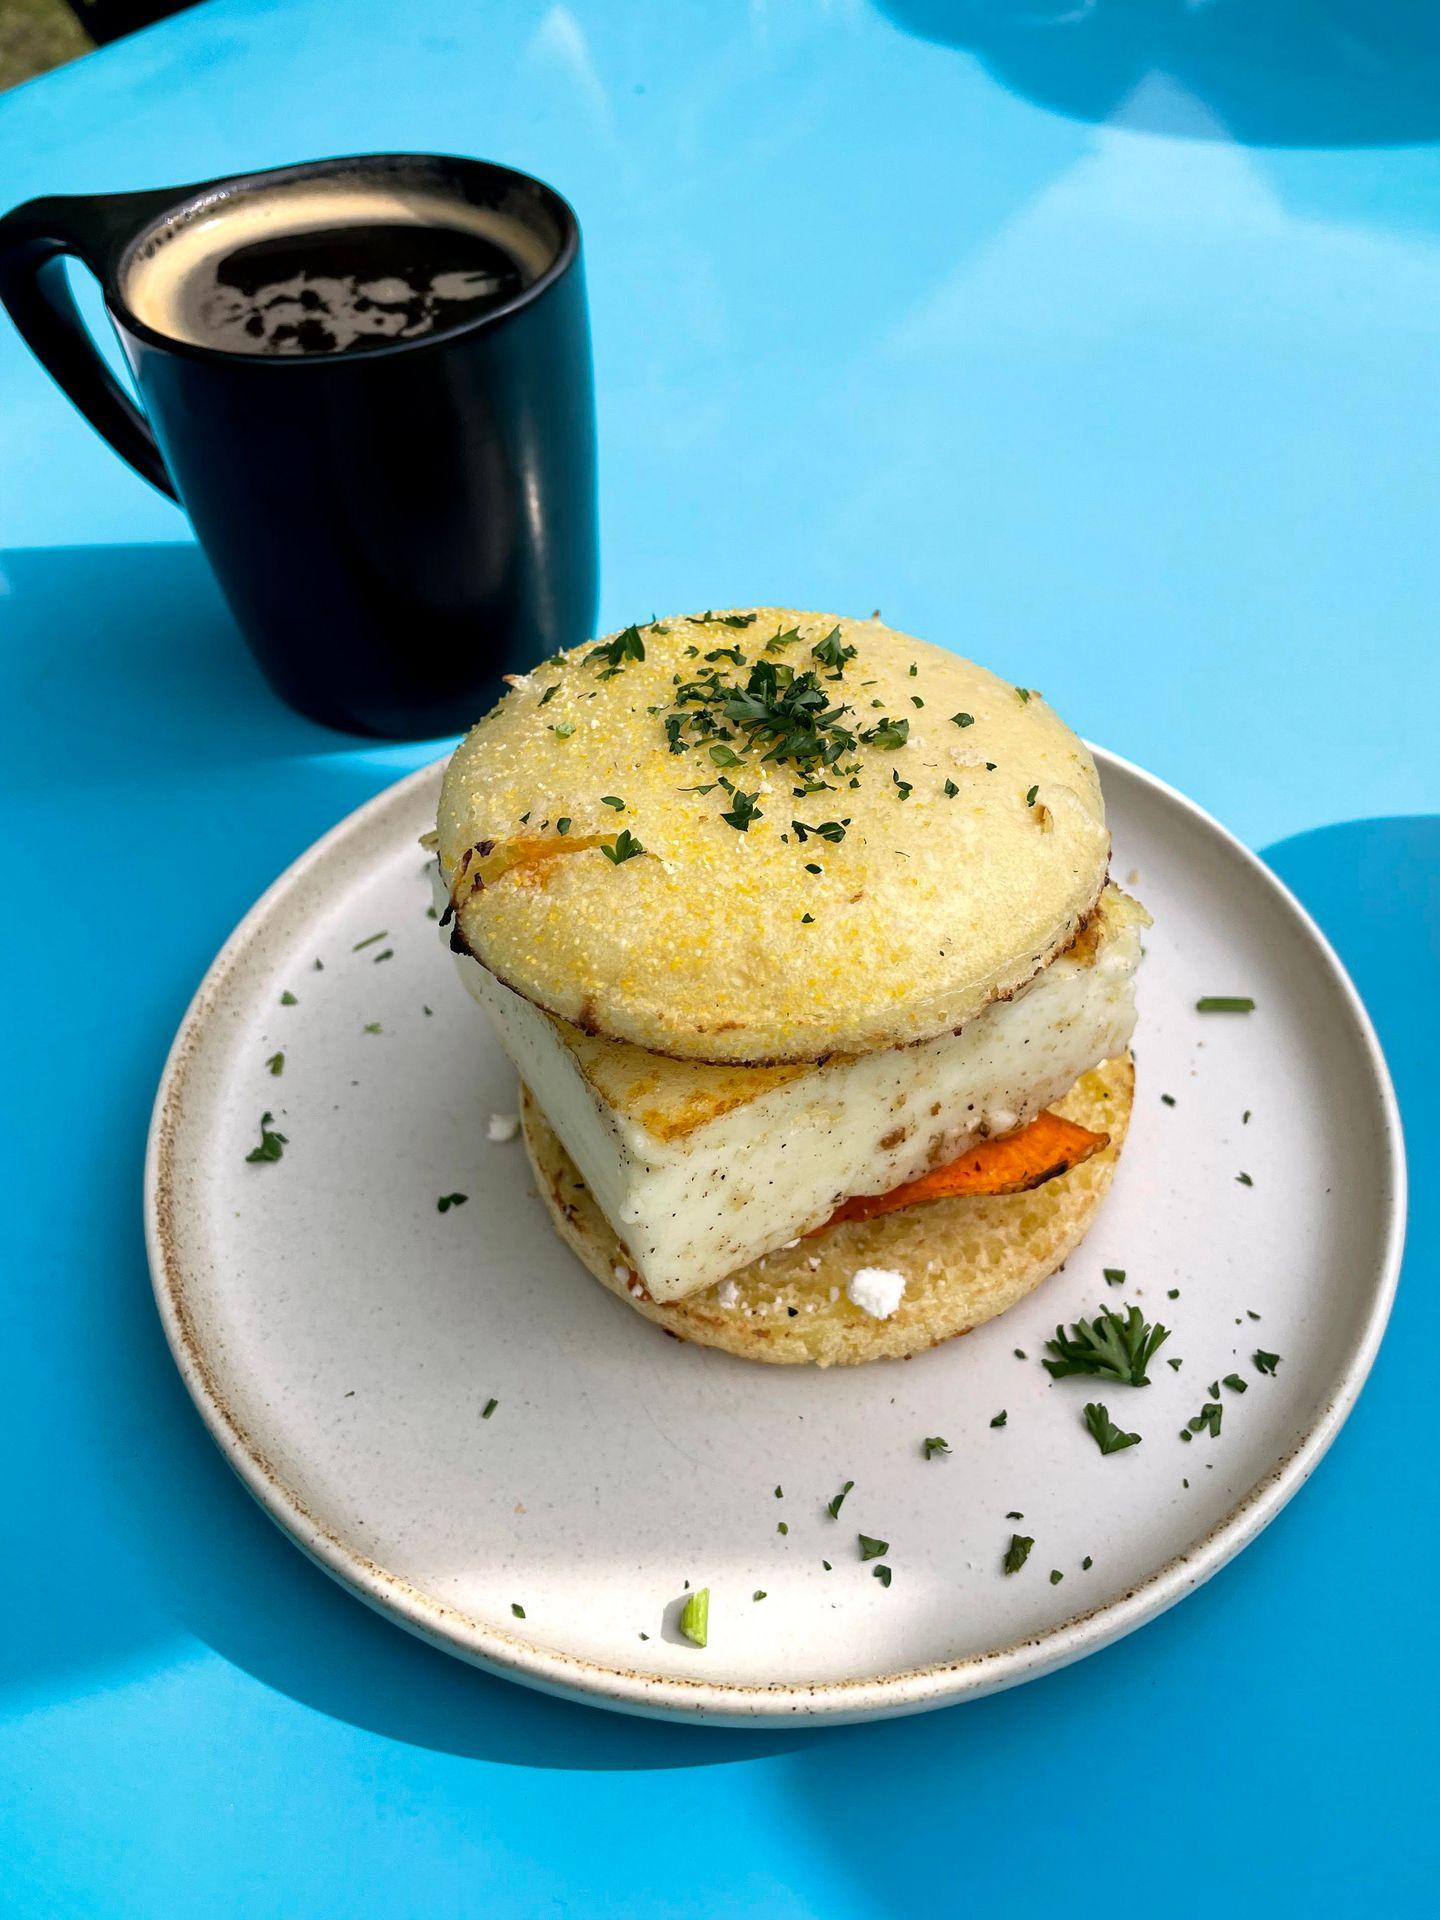 A breakfast sandwich with a square, souffled egg. It sits on a blue table next to a coffee mug.